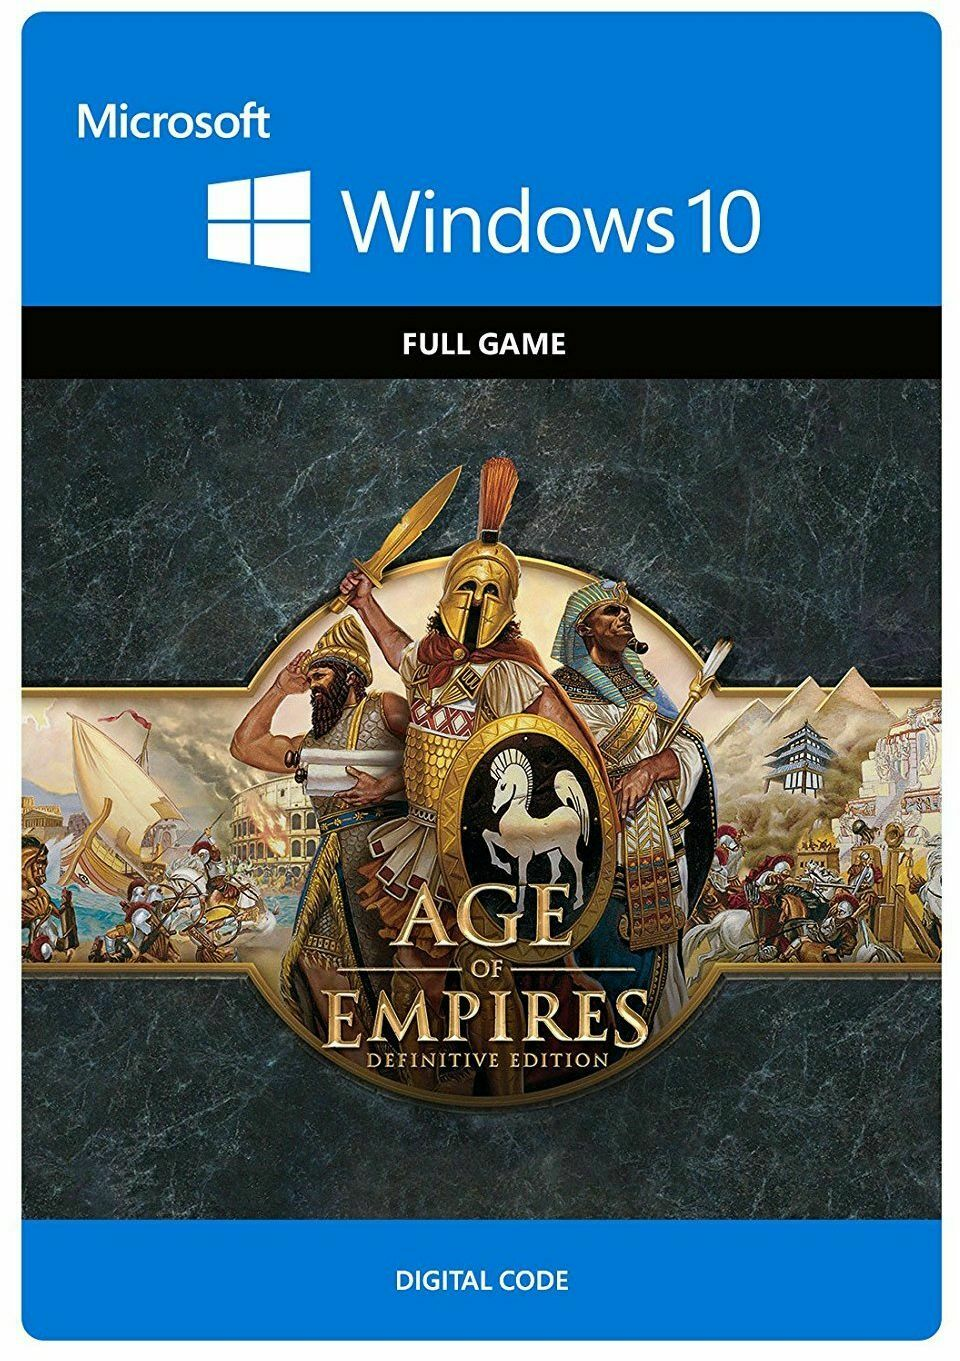 a/age of empires definitive edition